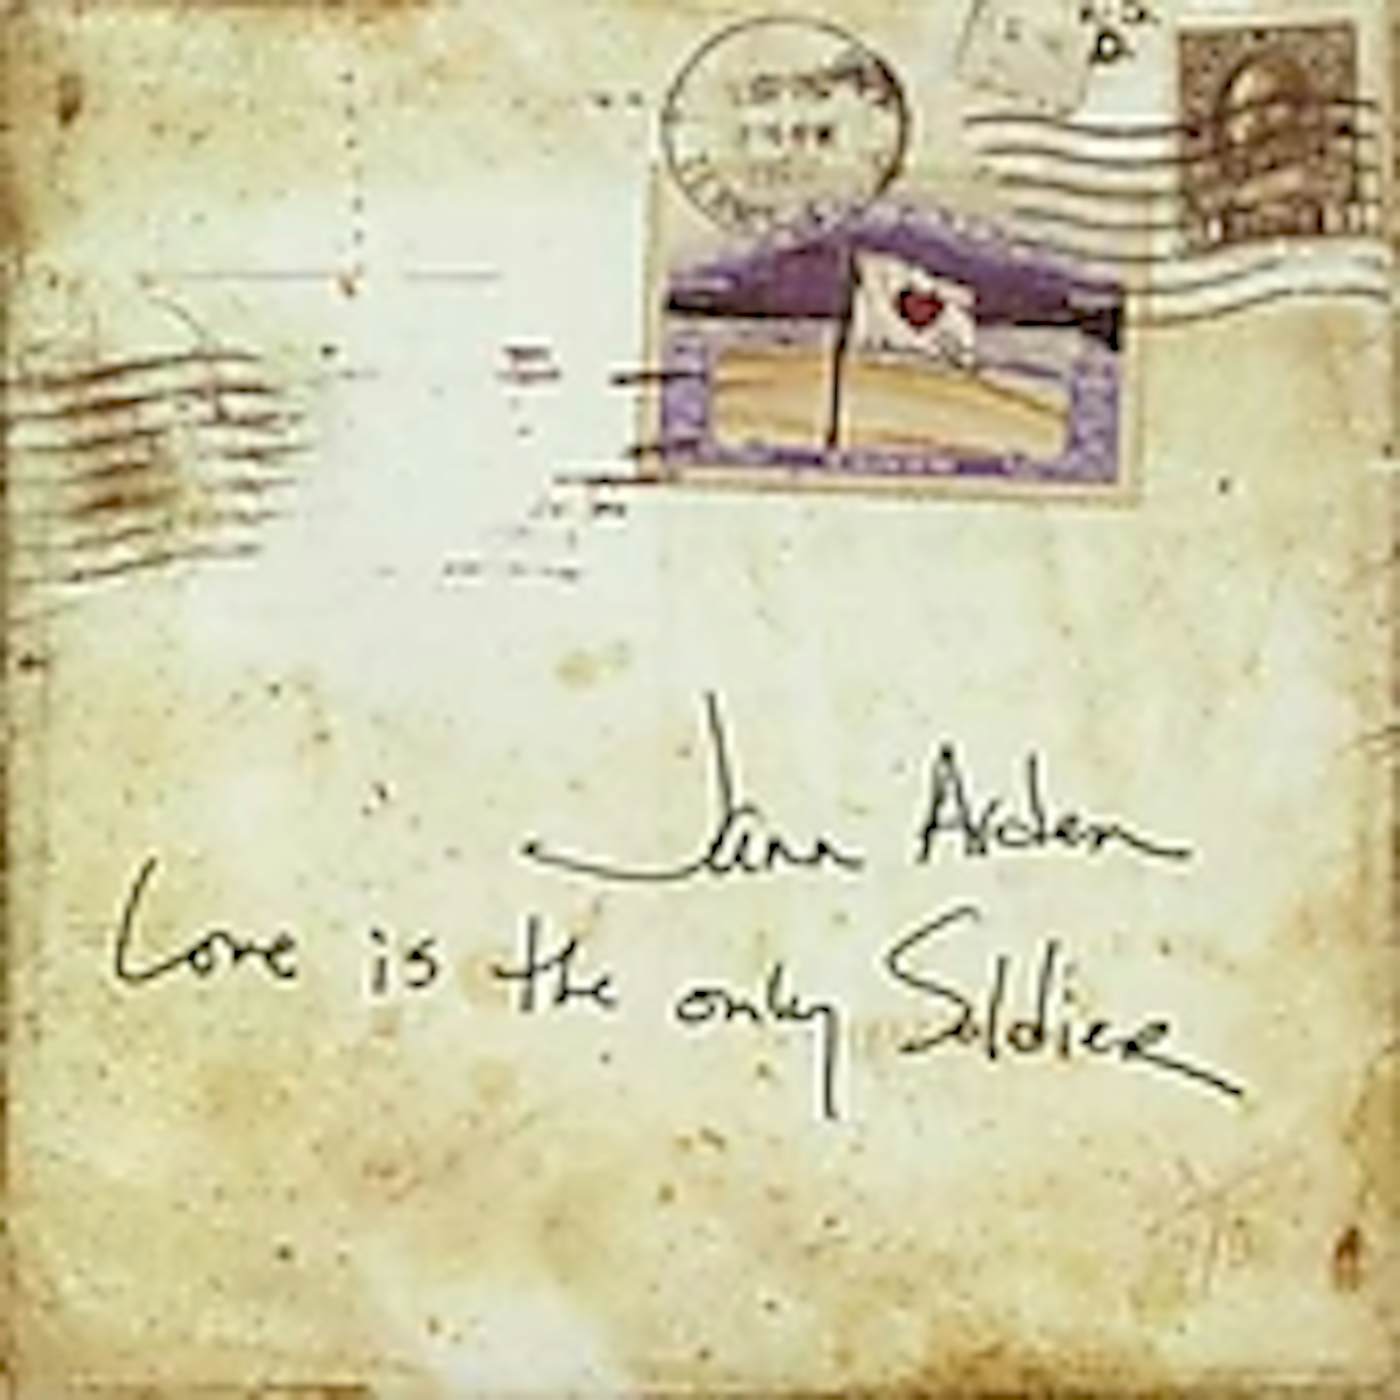 Jann Arden LOVE IS THE ONLY SOLDIER CD